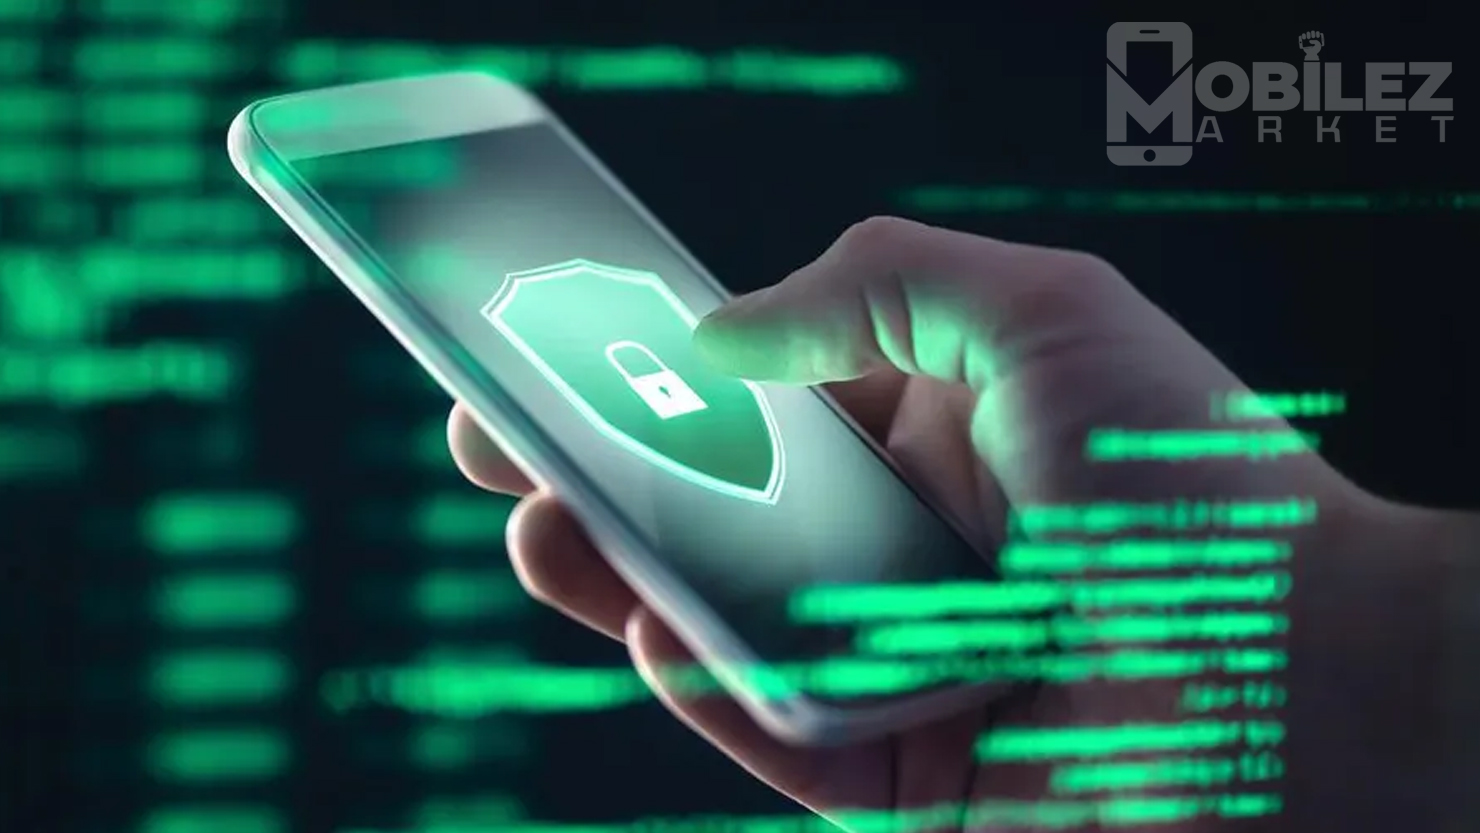 Mobile Marketplace Security | Protecting Your Data and Transactions